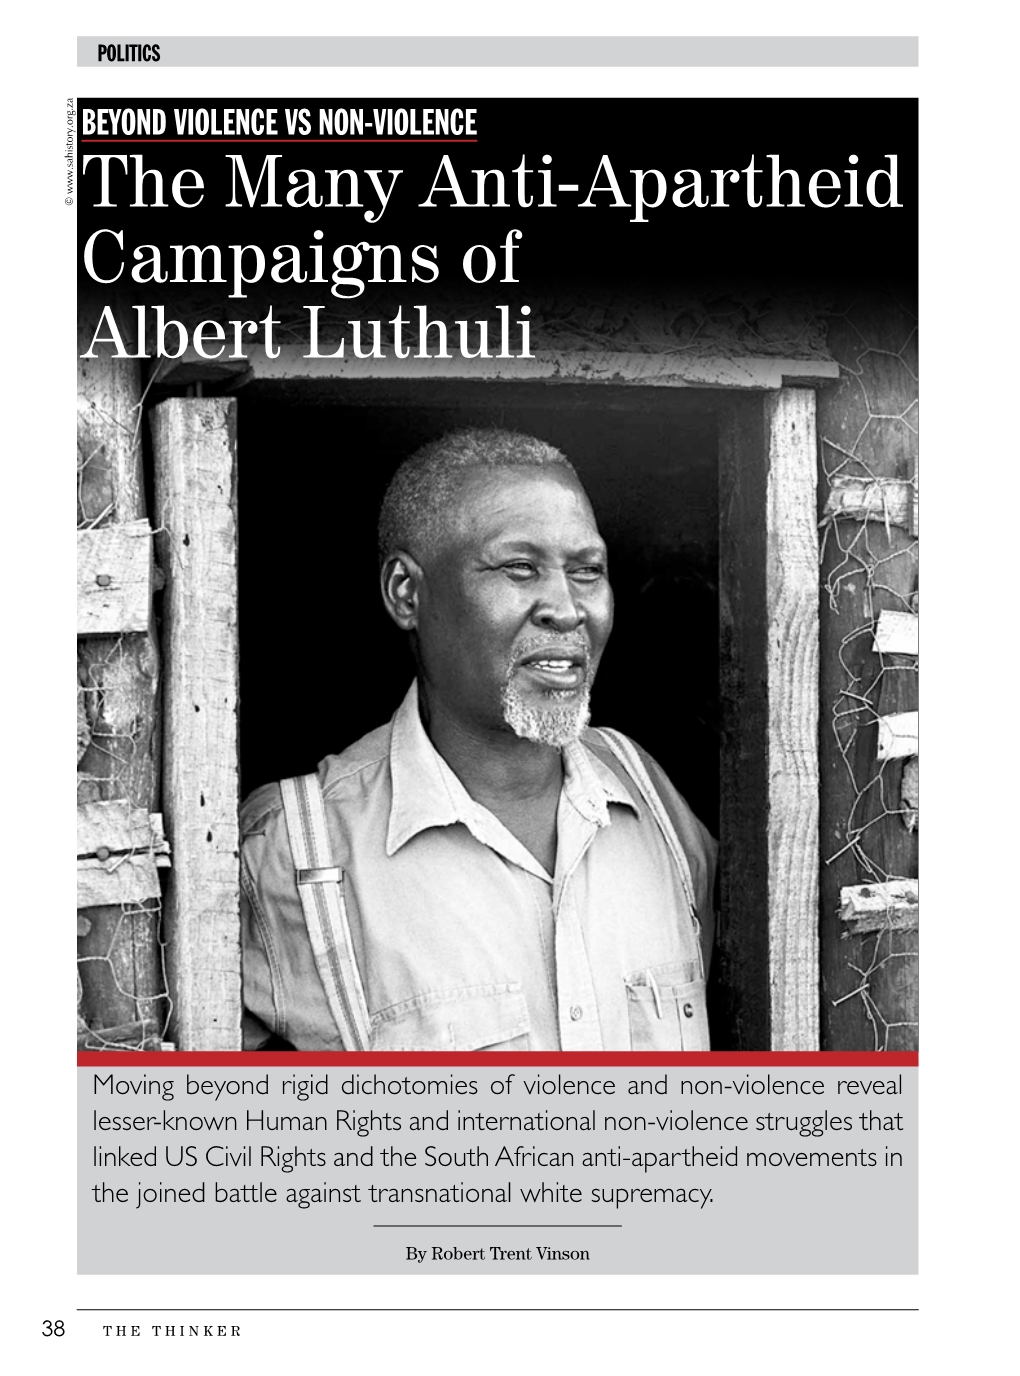 The Many Anti-Apartheid Campaigns of Albert Luthuli